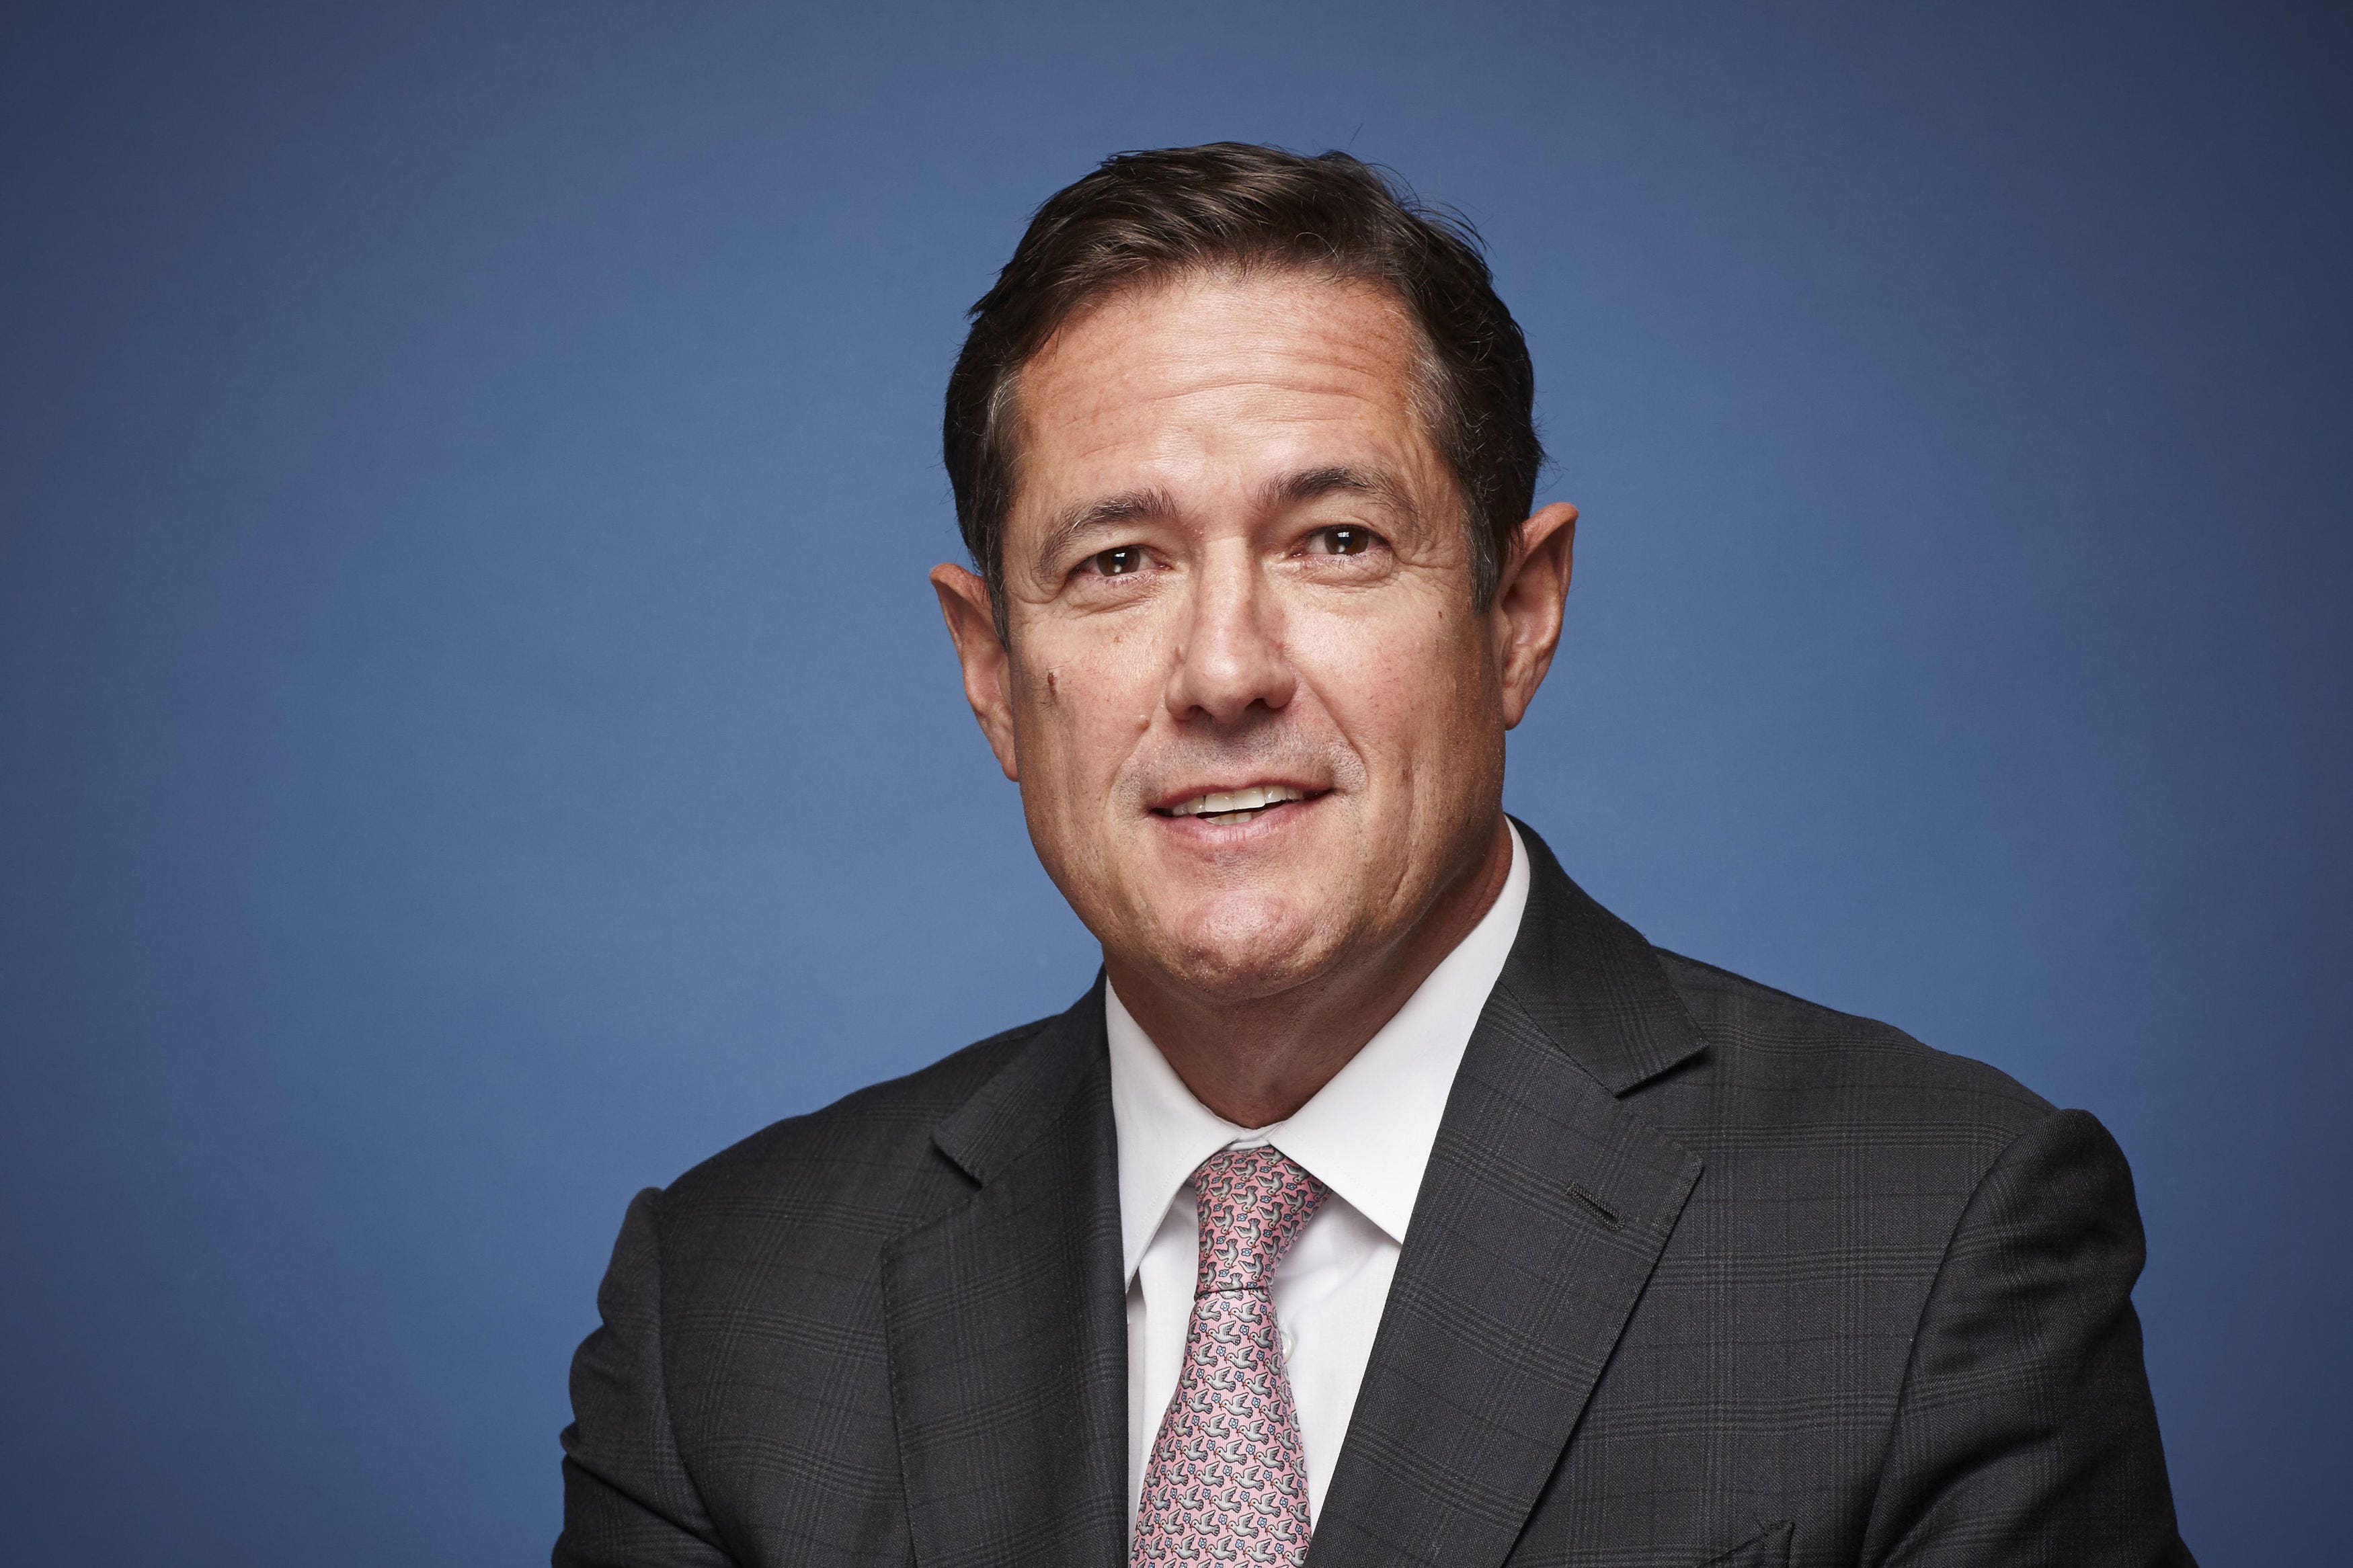 American banking giant JP Morgan Chase is suing former Barclays boss Jes Staley in efforts to hold him personally responsible for his alleged ties to convicted sex offender Jeffrey Epstein (Barclays/PA)